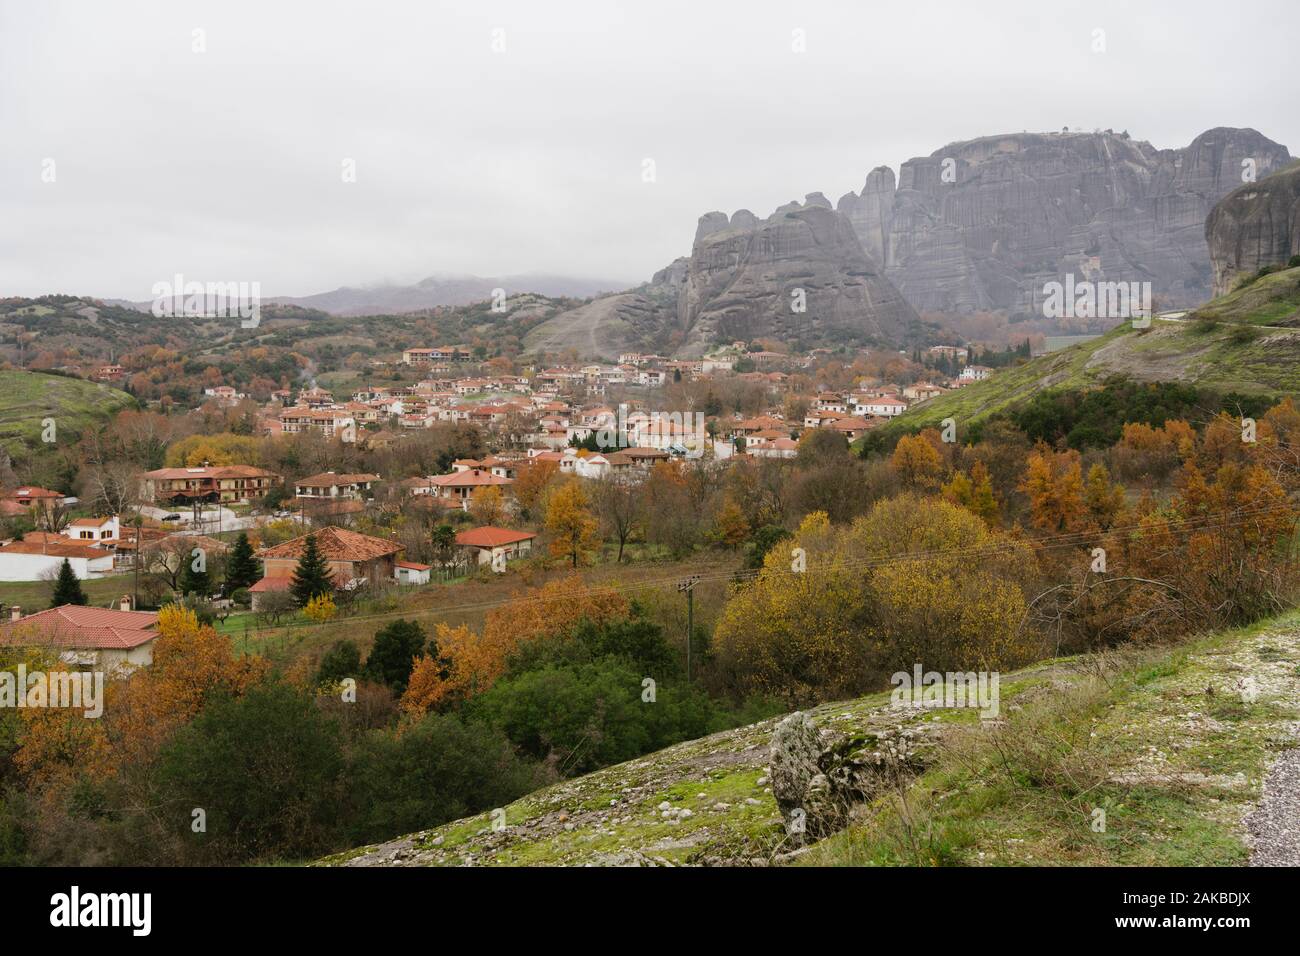 Meteora, Greece - Dec 19, 2019: View of Trikala city in the 'shadow' of the rocks of Meteora. Trikala, Greece Stock Photo